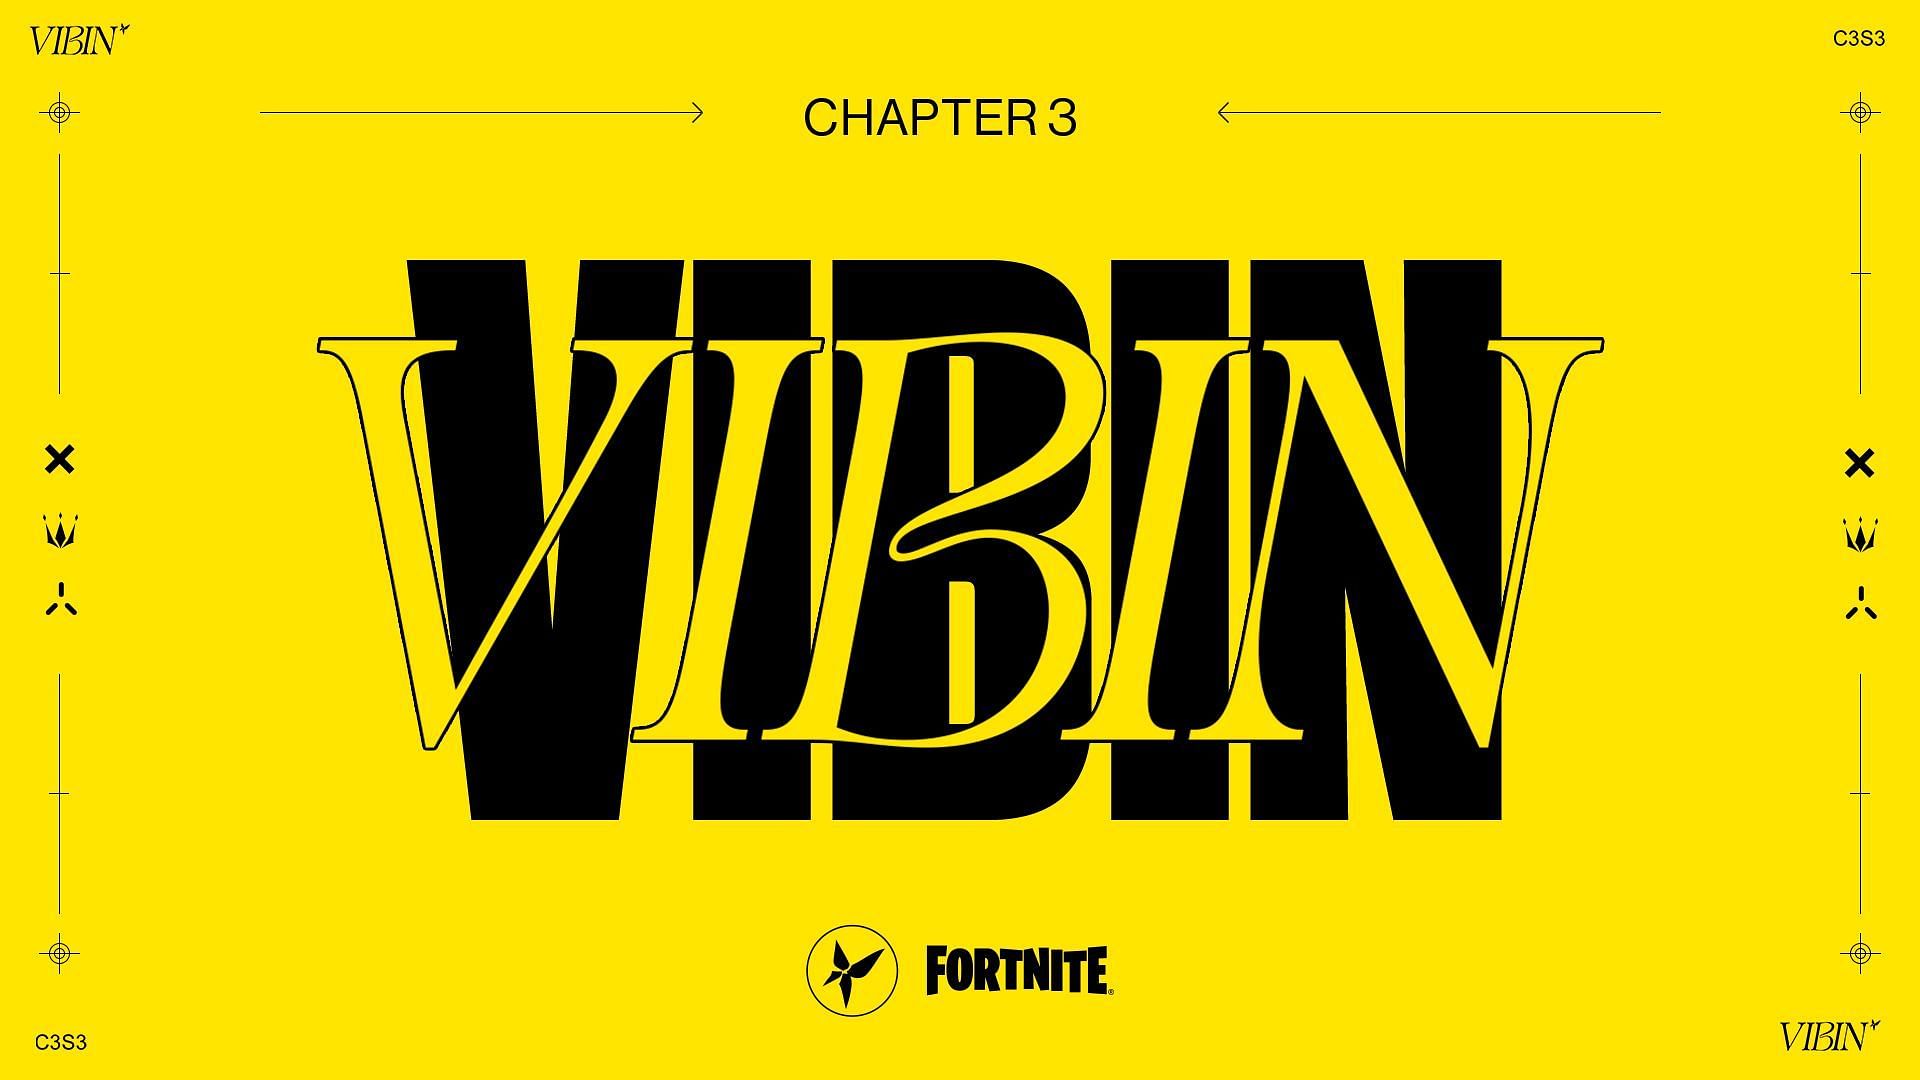 Everything new in Fortnite Chapter 3 Season 3: Indiana Jone skin, Reality Tree POI, Ballers, and more